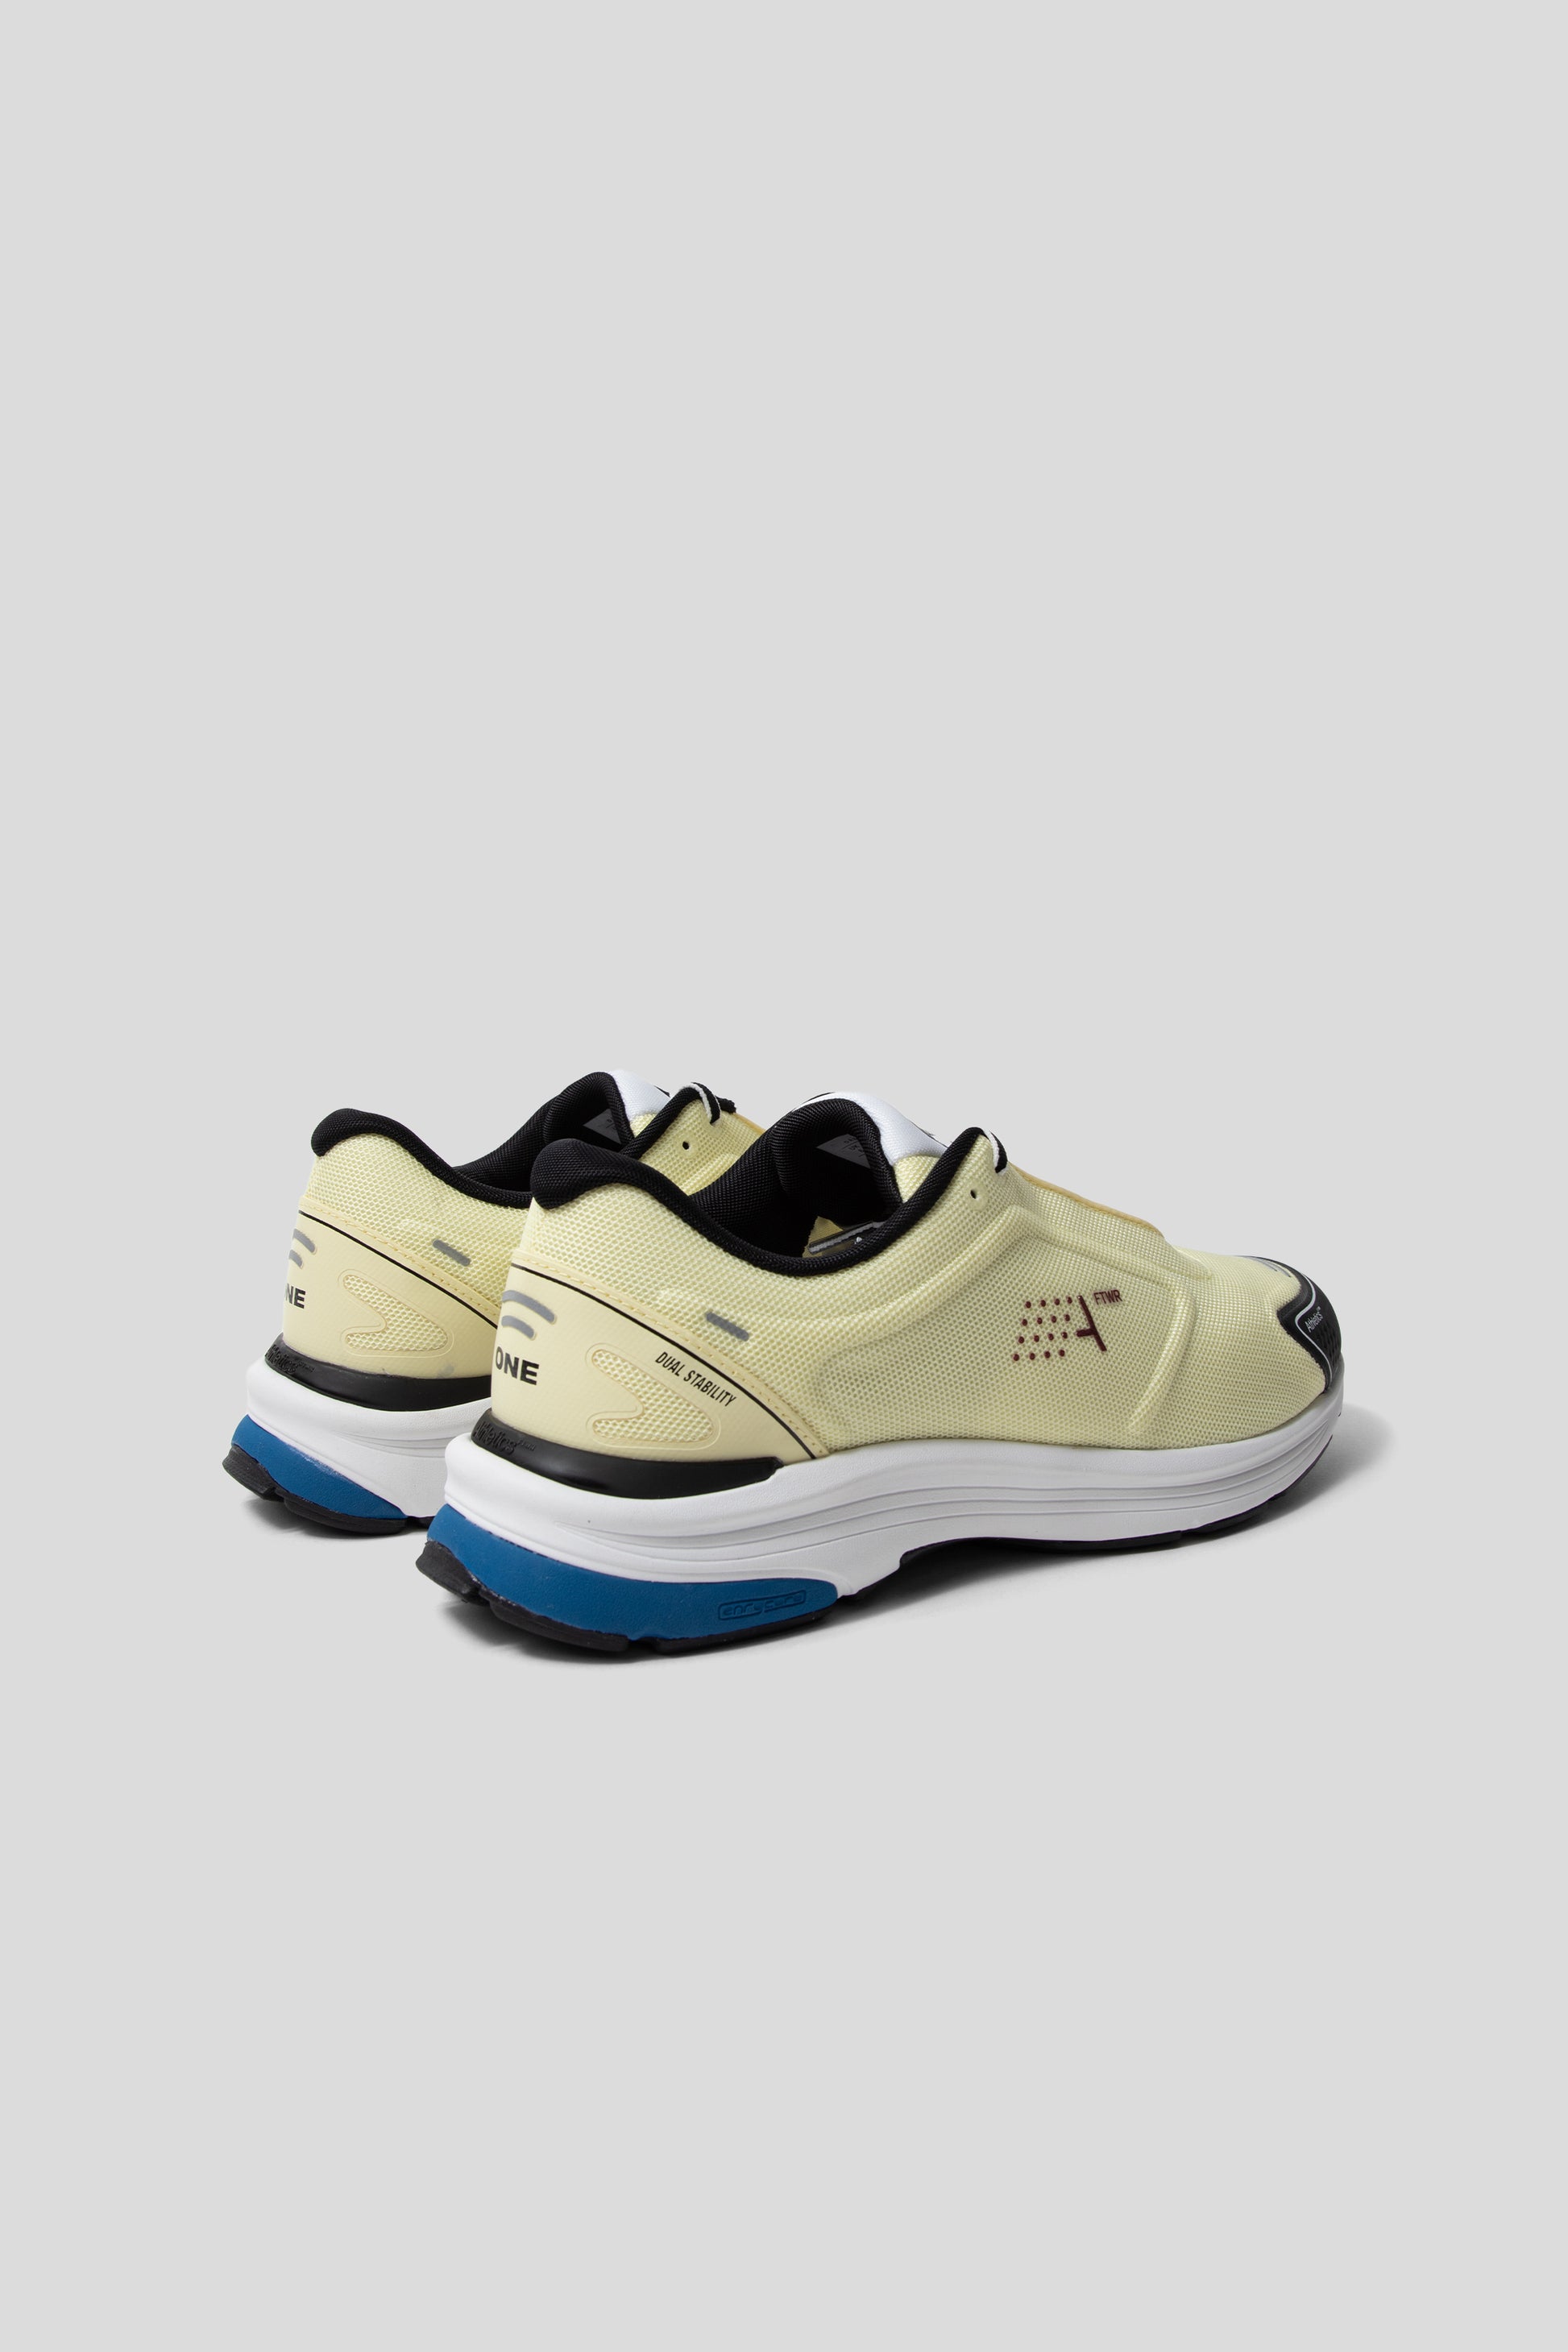 Athletic FTWR One Remstrd sneaker in Wax Yellow and Black